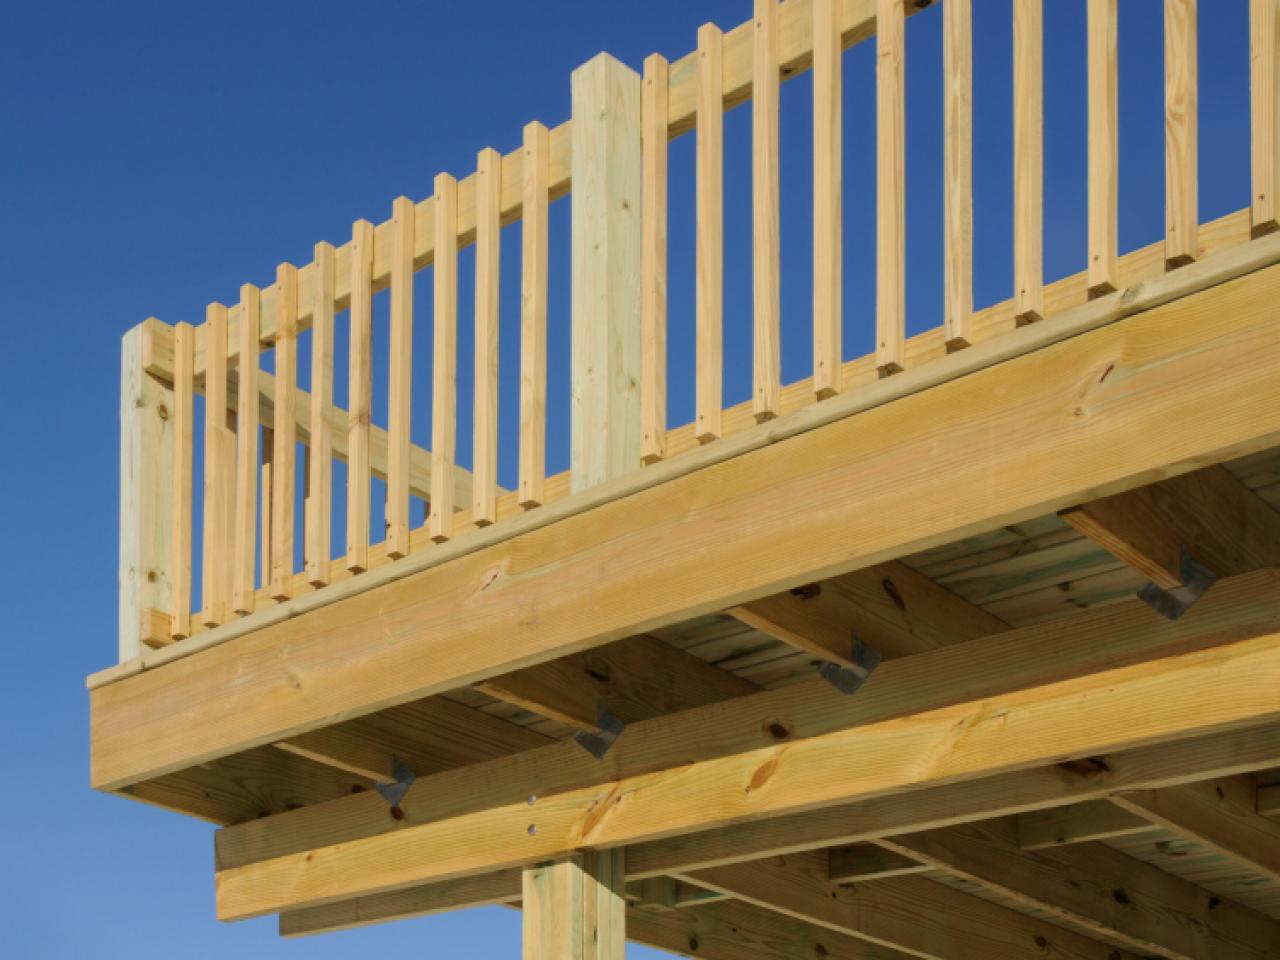 Decking Materials Know Your Options, What Is The Best Material For Outdoor Decks